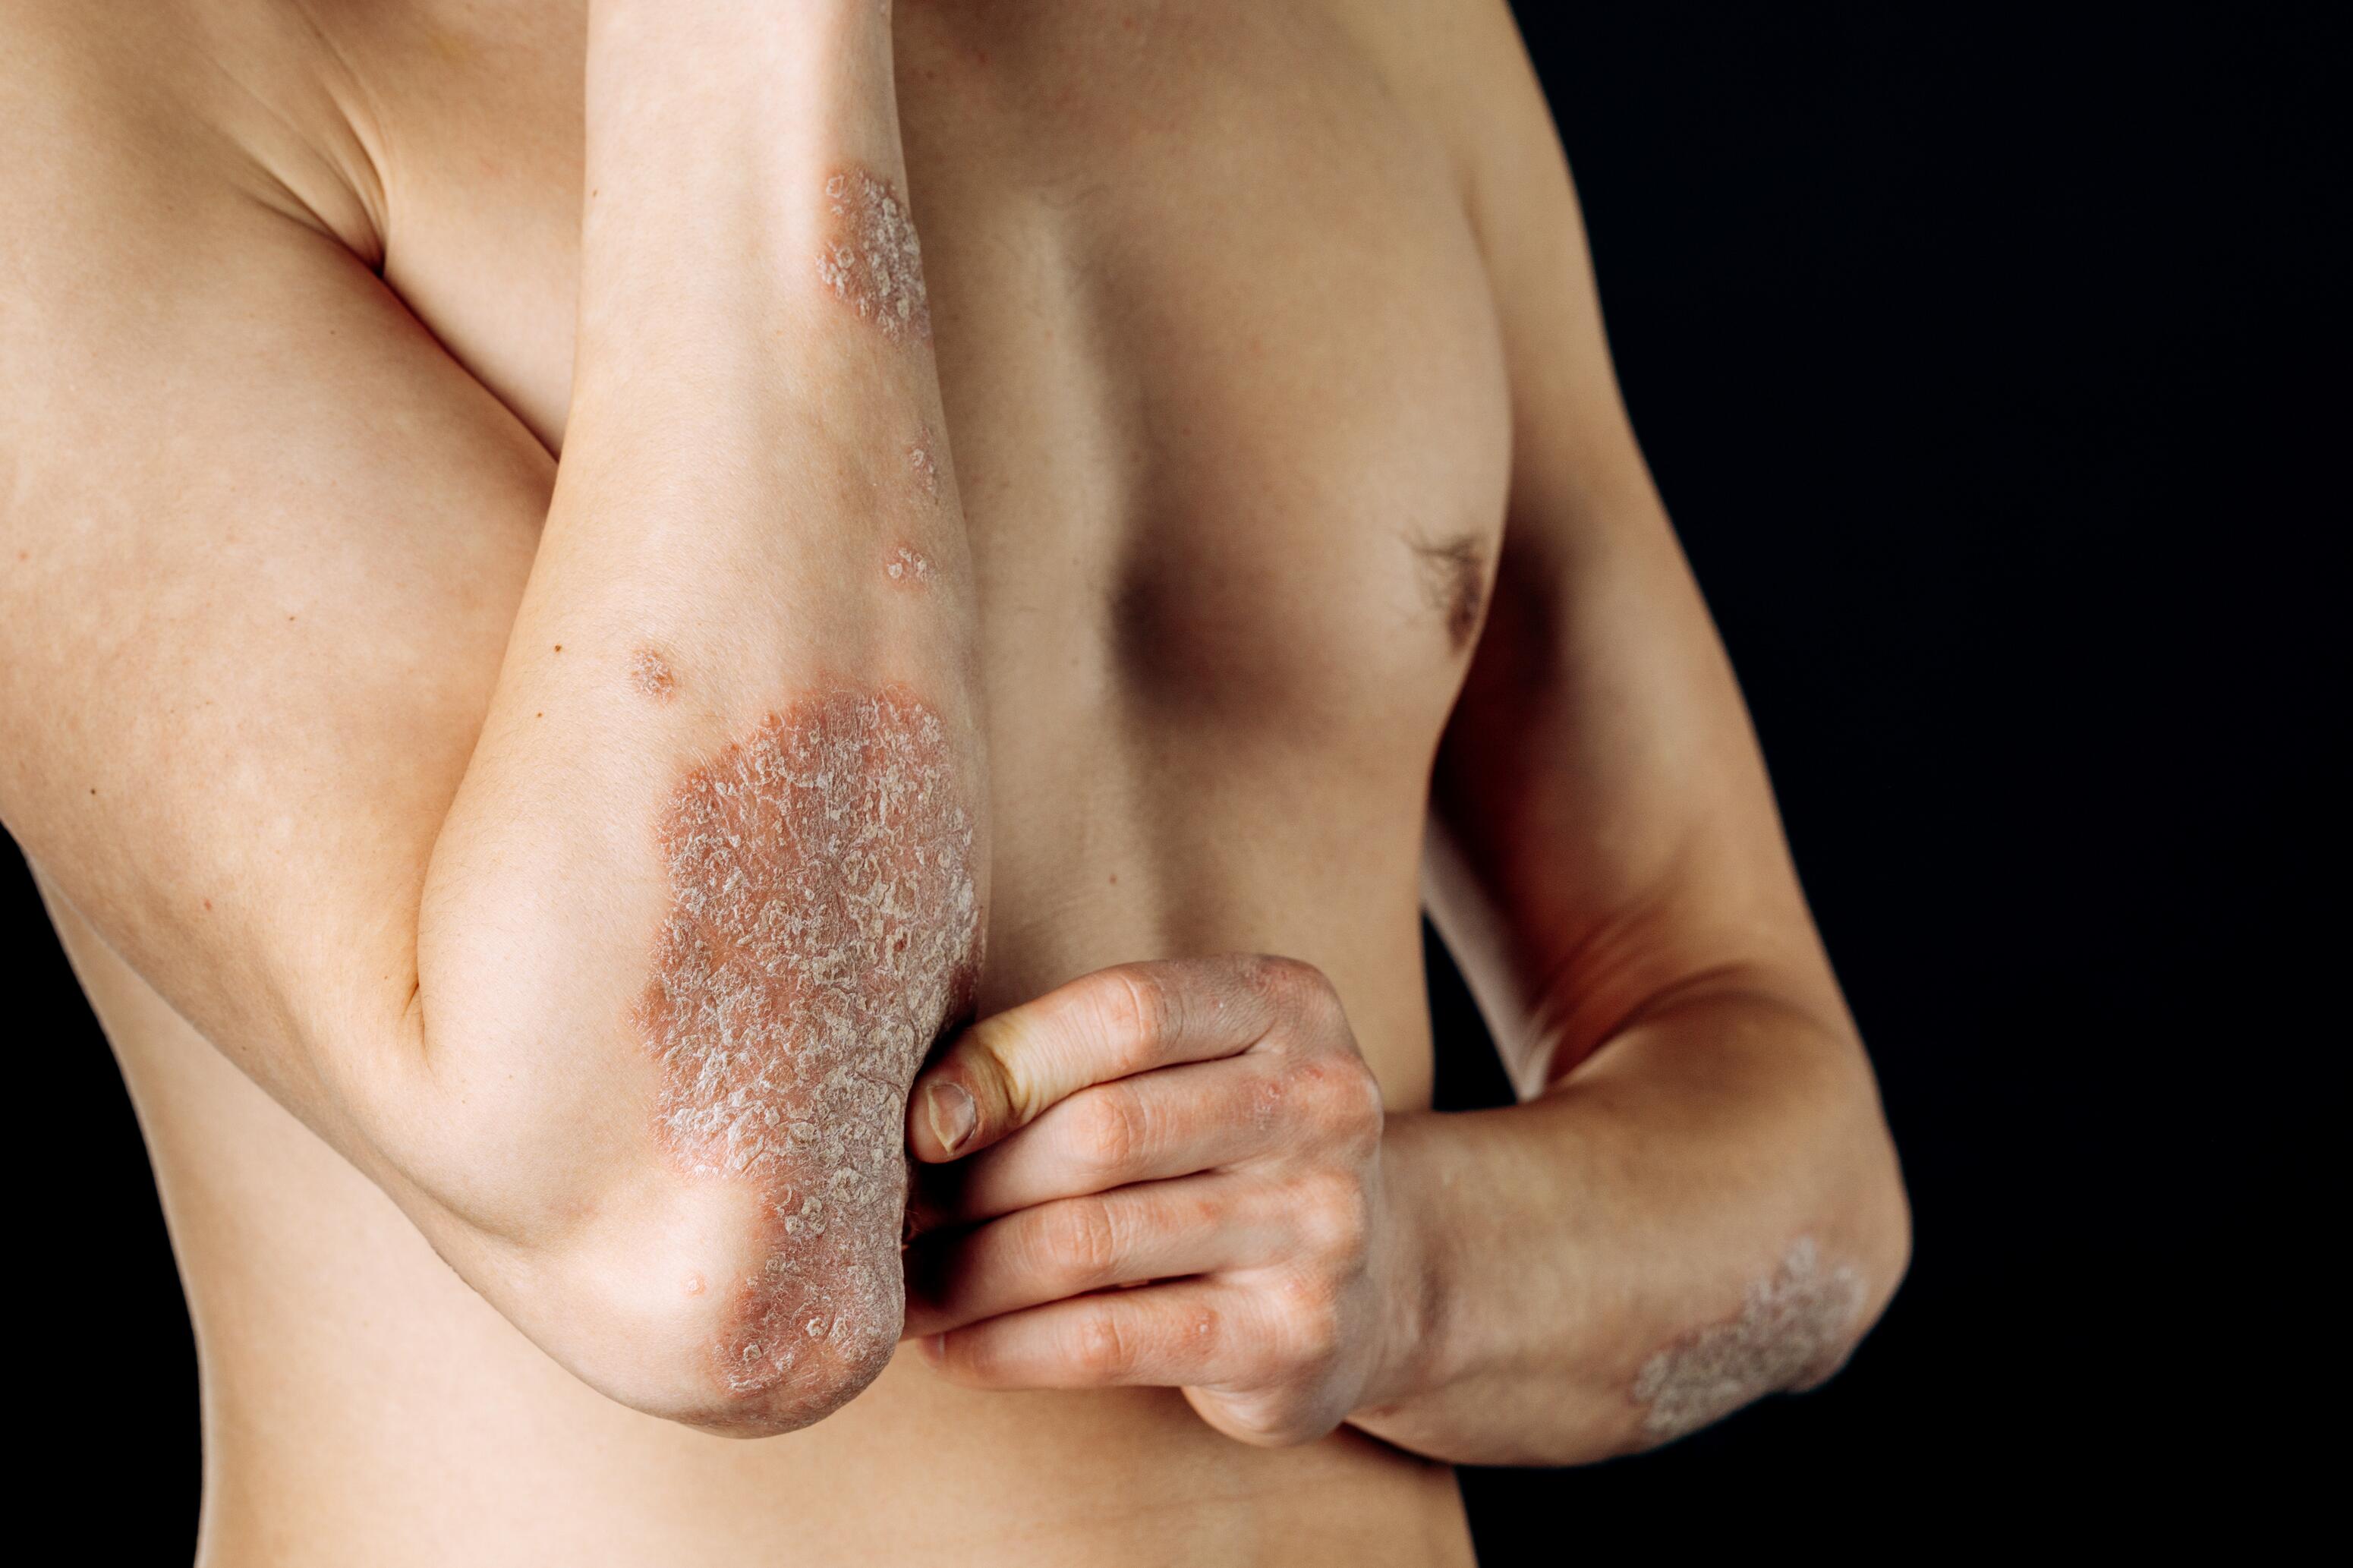 Man with psoriasis on his elbows